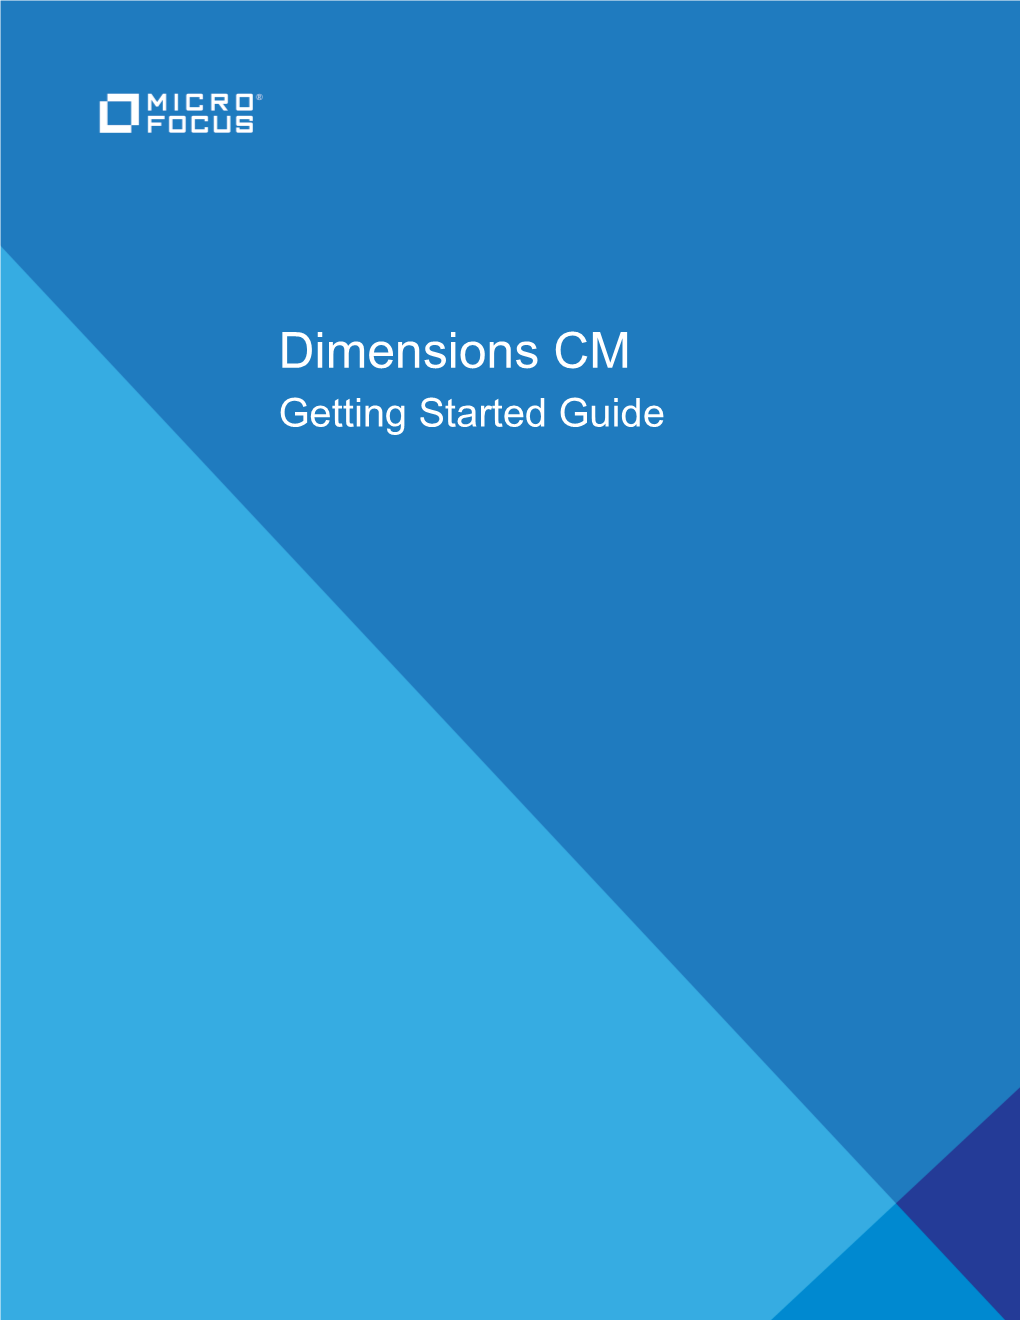 Dimensions CM Getting Started Guide Copyright © 1996 - 2020 Micro Focus Or One of Its Affiliates